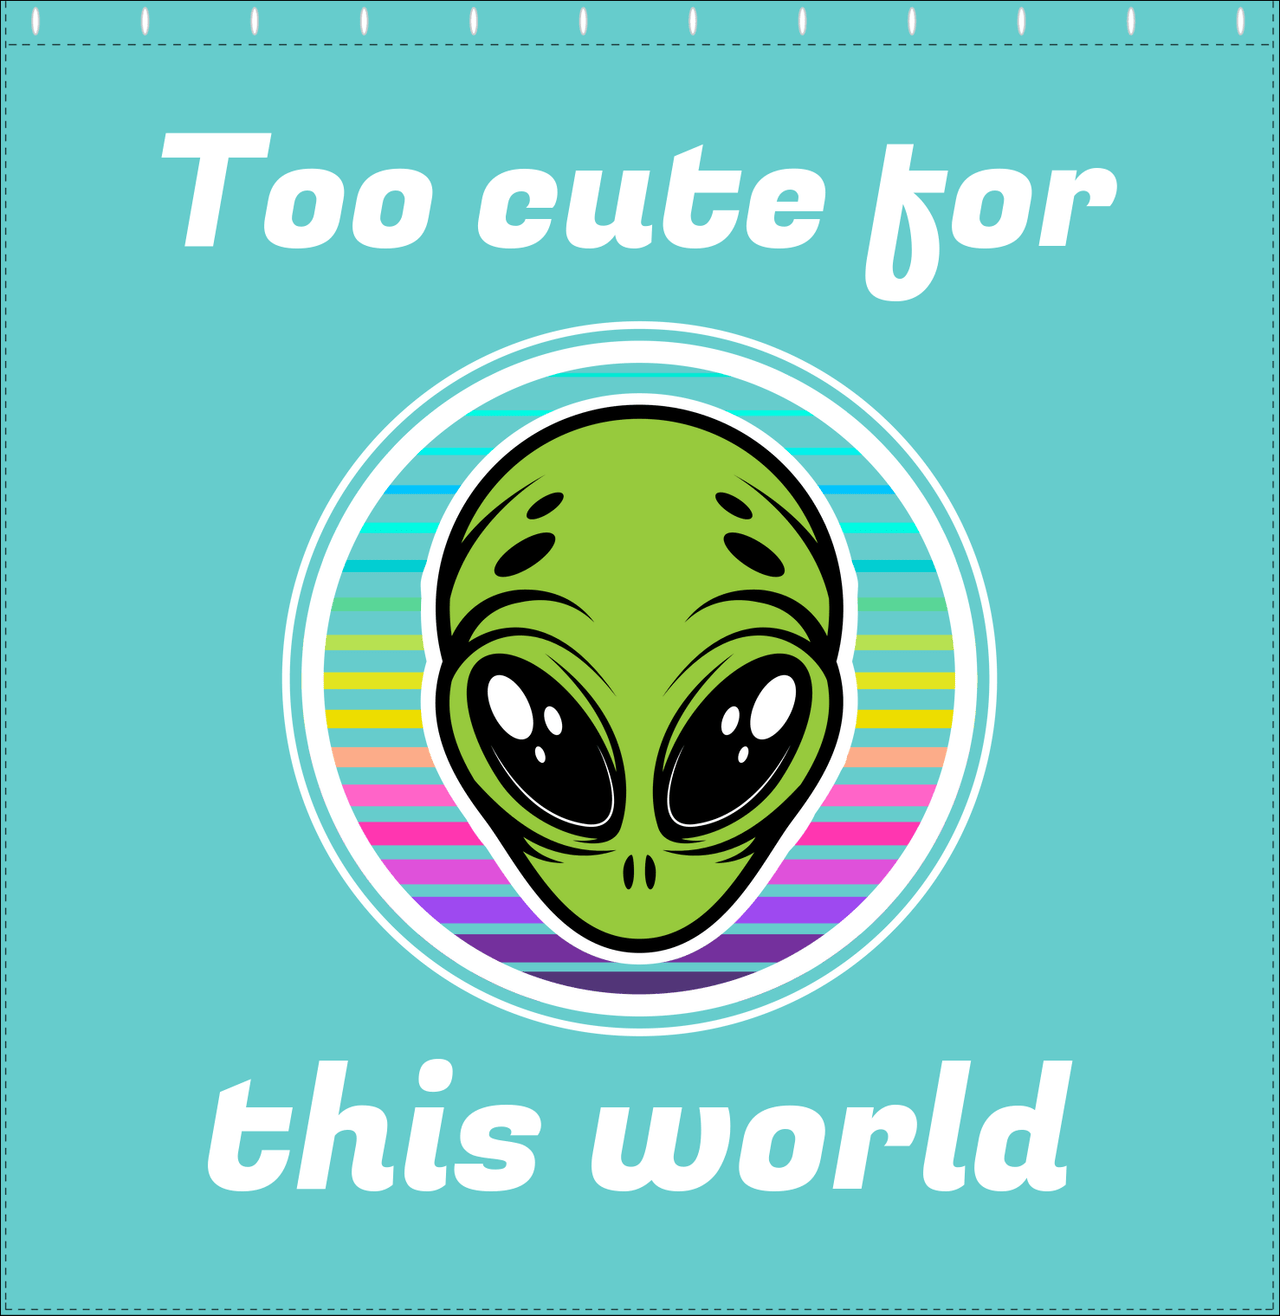 Personalized Aliens / UFO Shower Curtain - Too Cute For This World - Decorate View